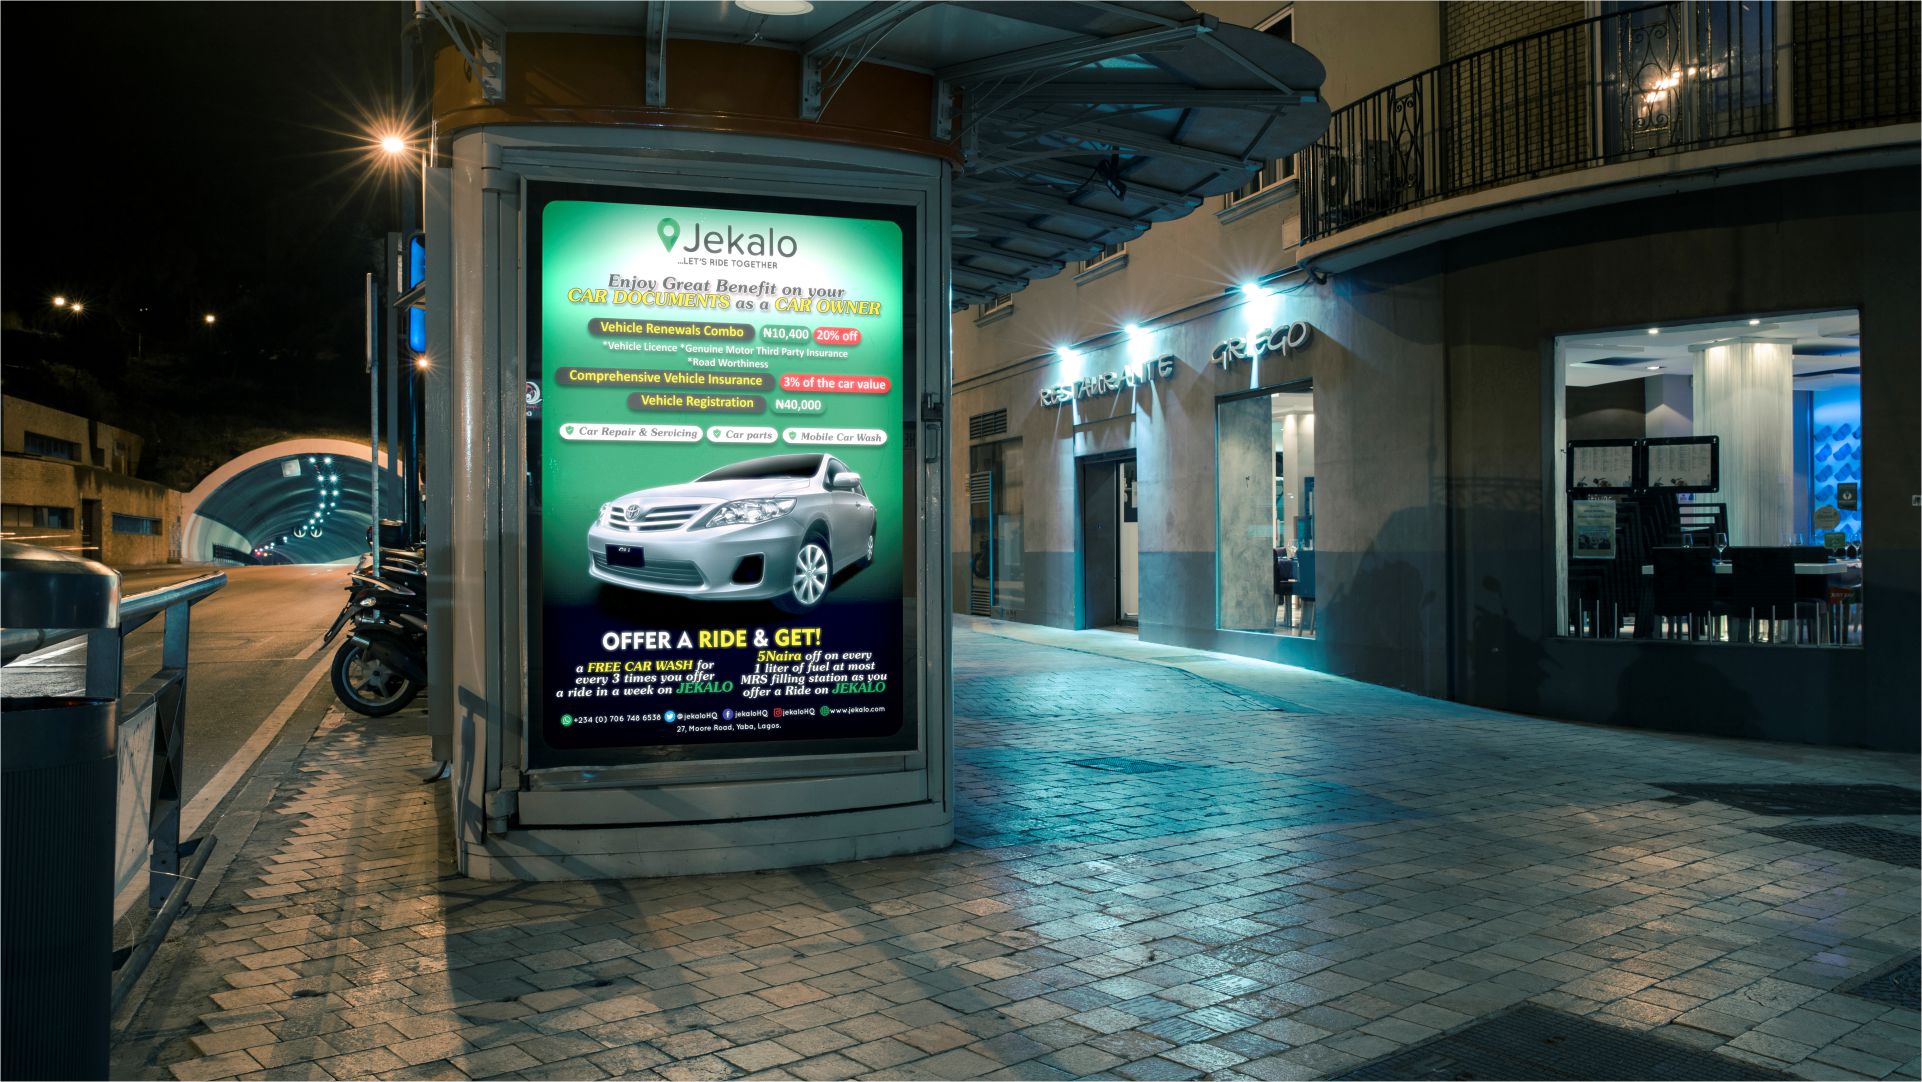 outdoor advertisement and brand identity in lagos nigeria